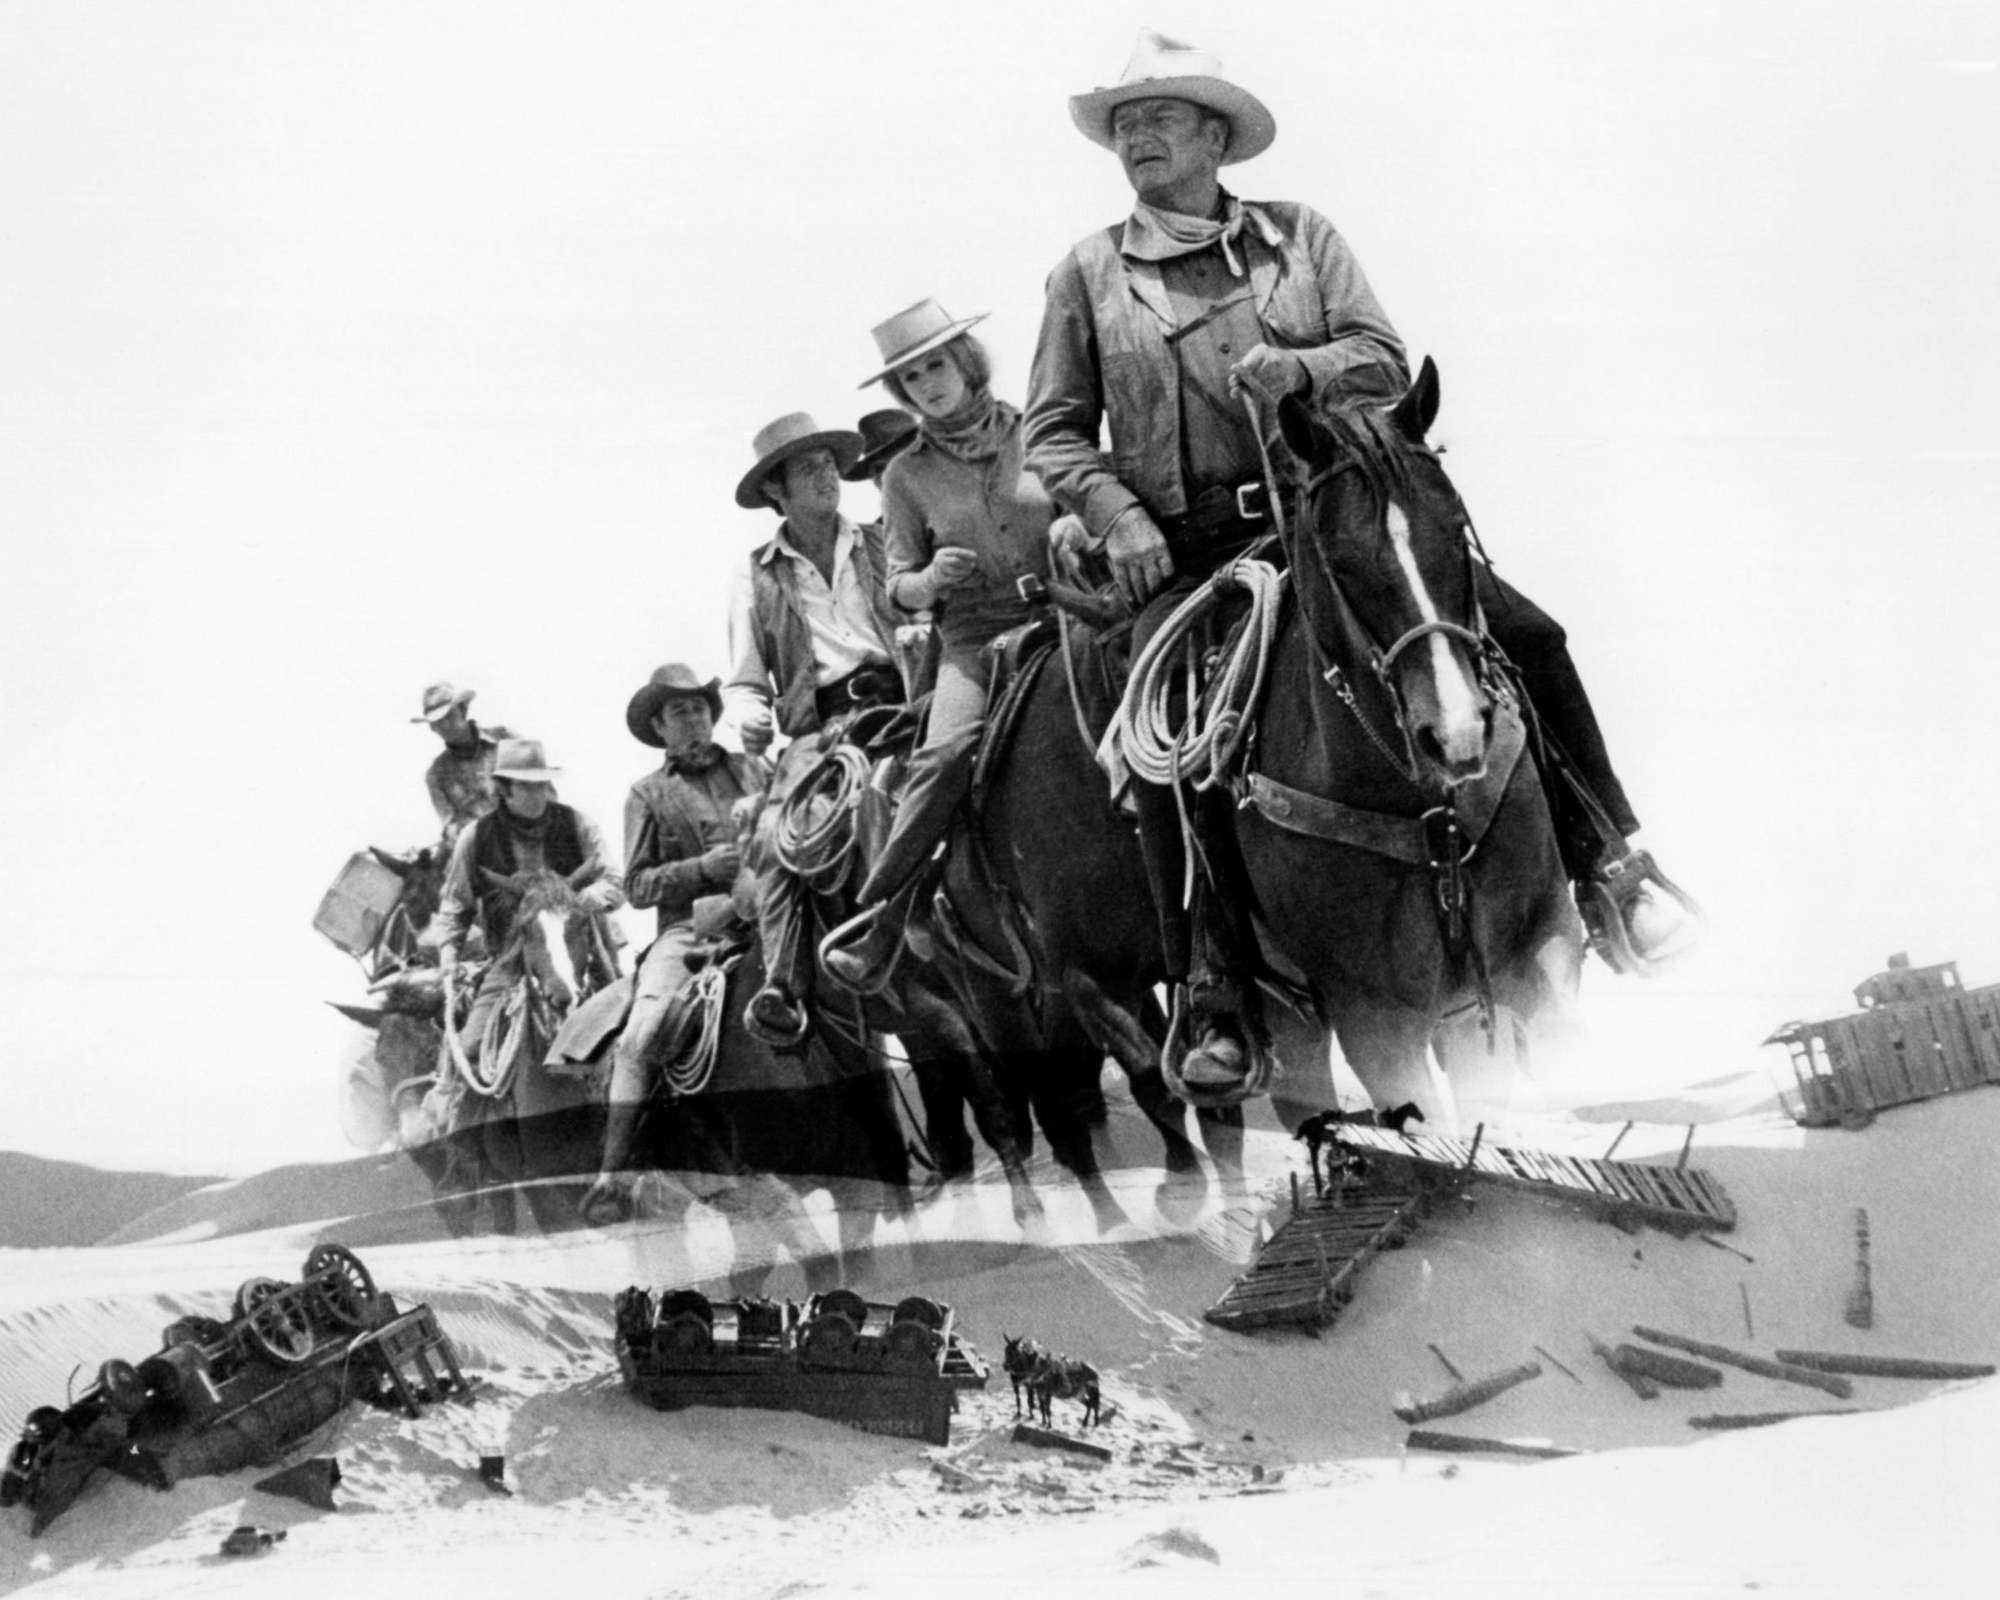 'The Train Robbers' John Wayne as Lane among other travelers on horses above an image of sand dunes with broken stagecoaches